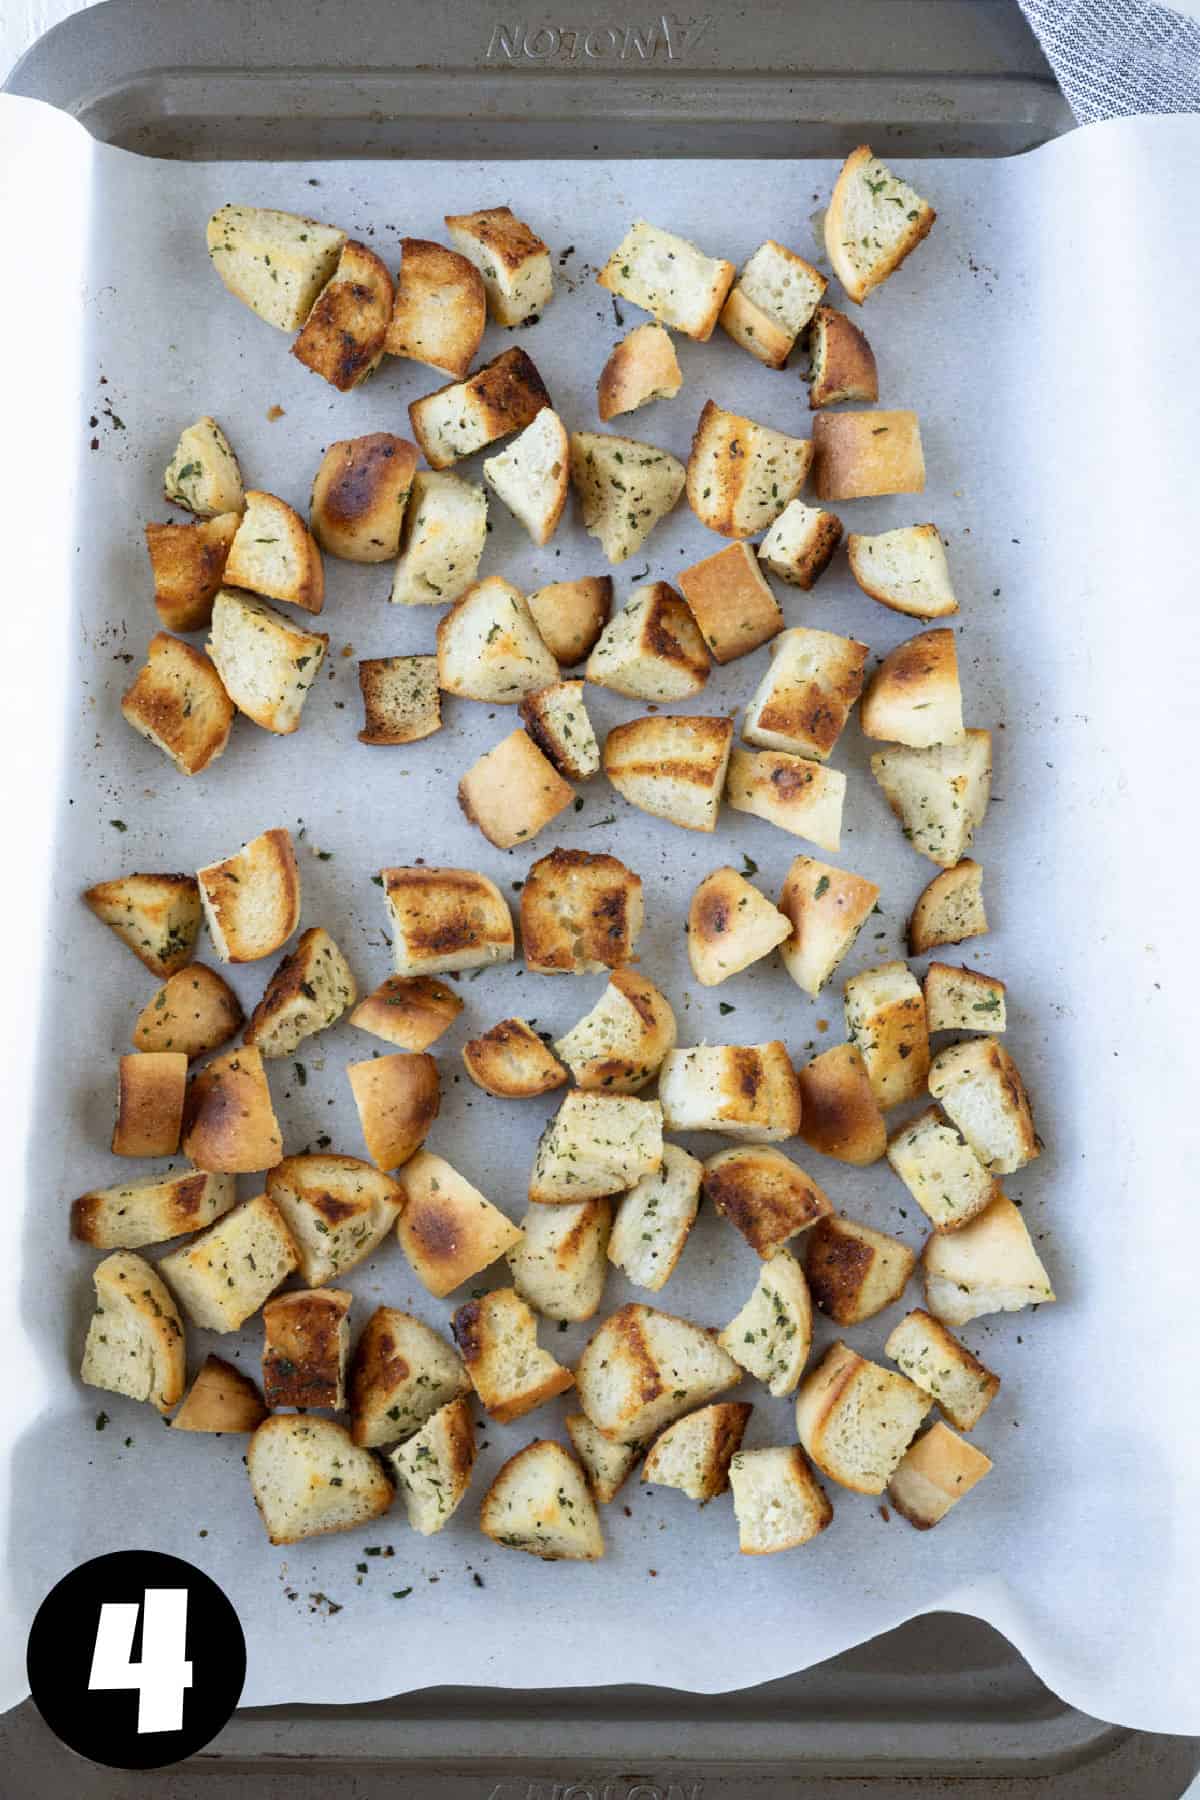 Croutons on a parchment lined baking sheet.